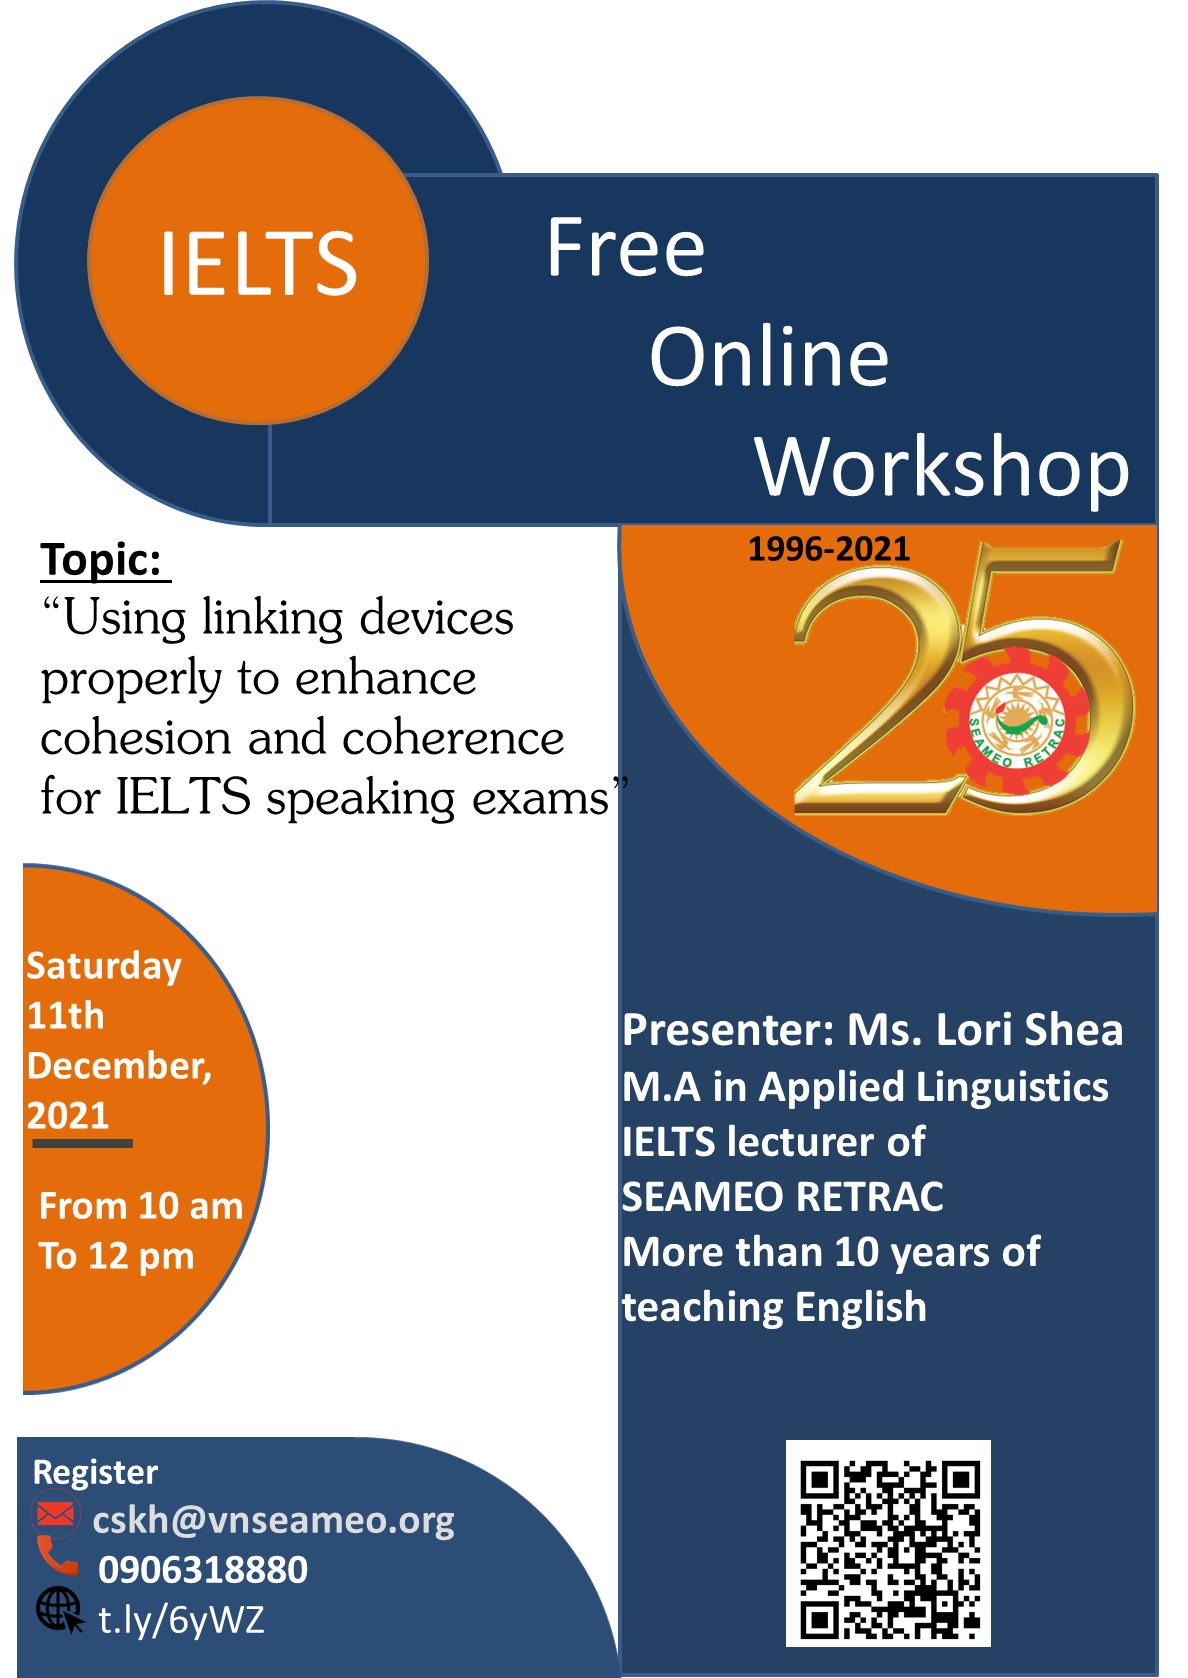 Buổi chia sẻ kiến thức chủ đề: Using linking devices properly to enhance cohesion and coherence for IELTS speaking exams